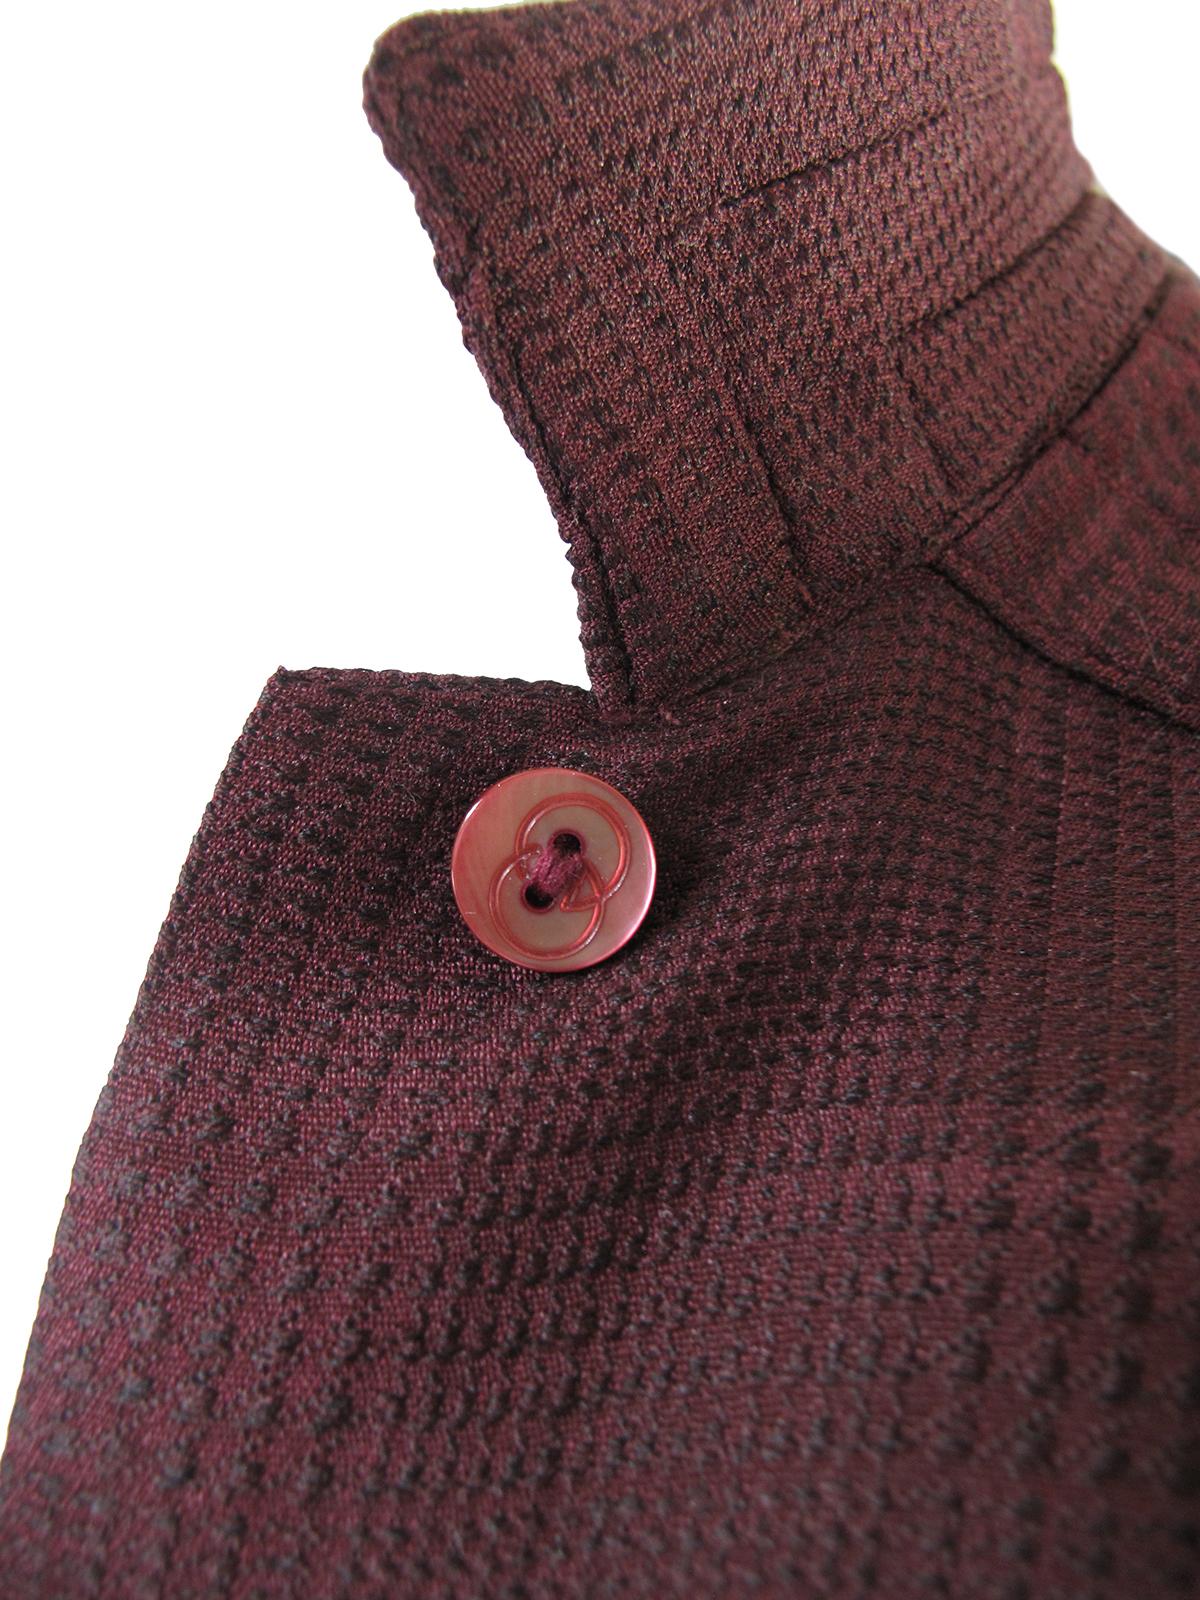 1980s Gucci silk herringbone blouse with plastic GG buttons. 
Condition: Very good. Size 38/ US Medium

We accept returns for refund, please see our terms. We offer free ground shipping within the US